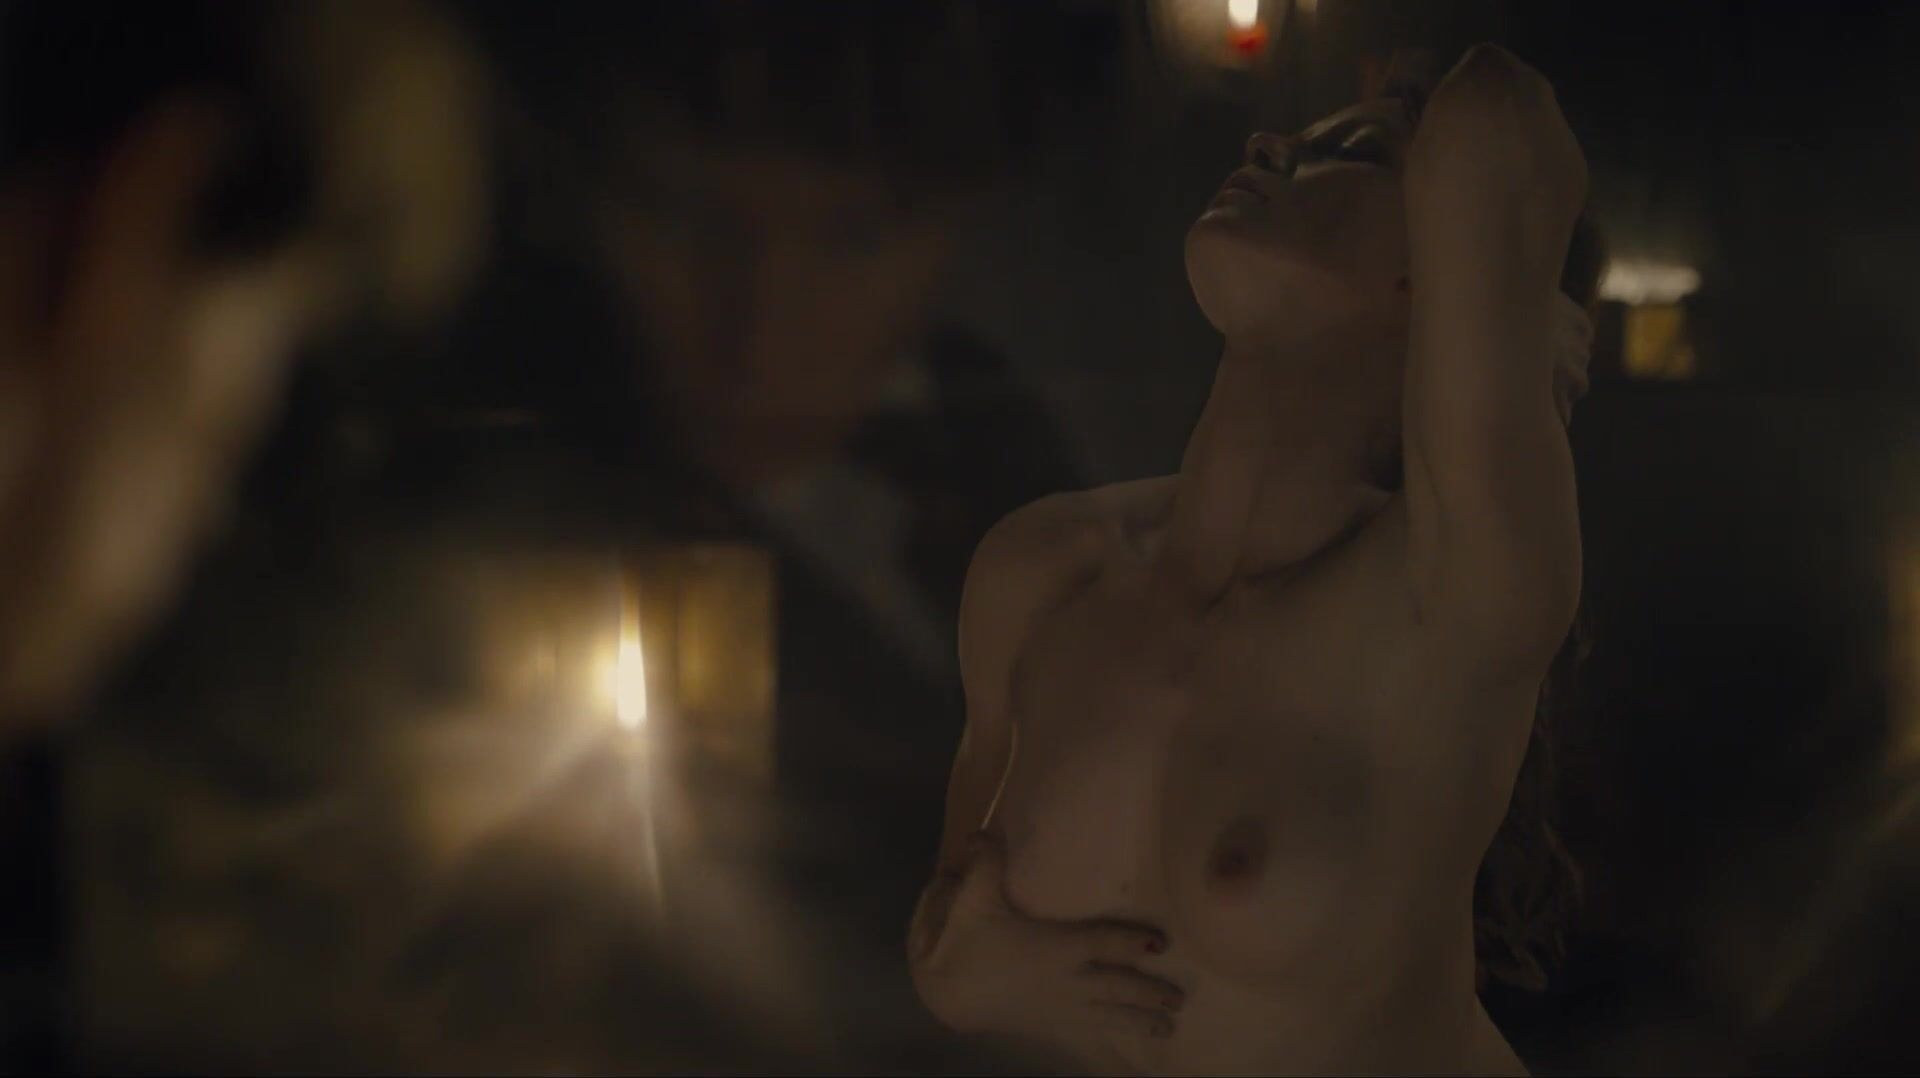 Erotica Director focuses on Sonya Cullingford's nice boobies showing them in The Danish Girl Farting